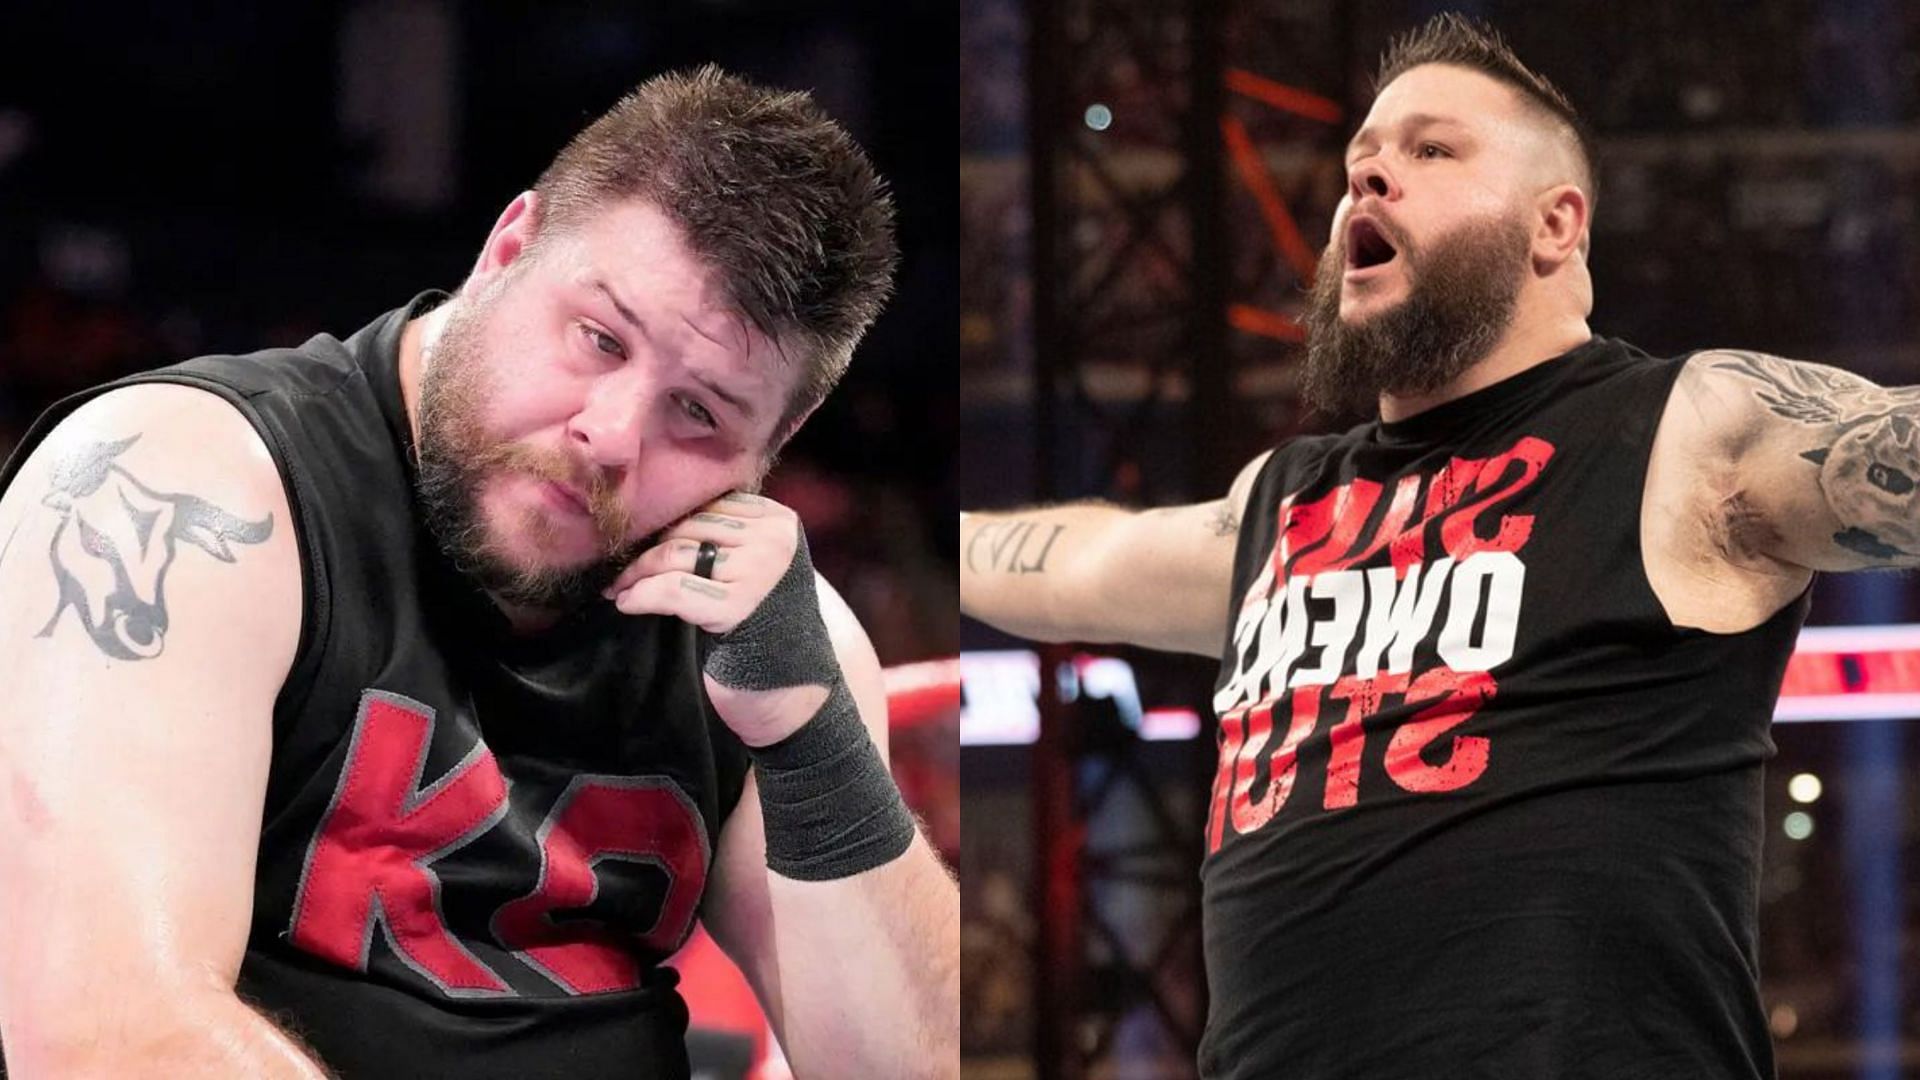 “He still blows up” – Former WWE manager says Kevin Owens looks like a ‘cab driver’